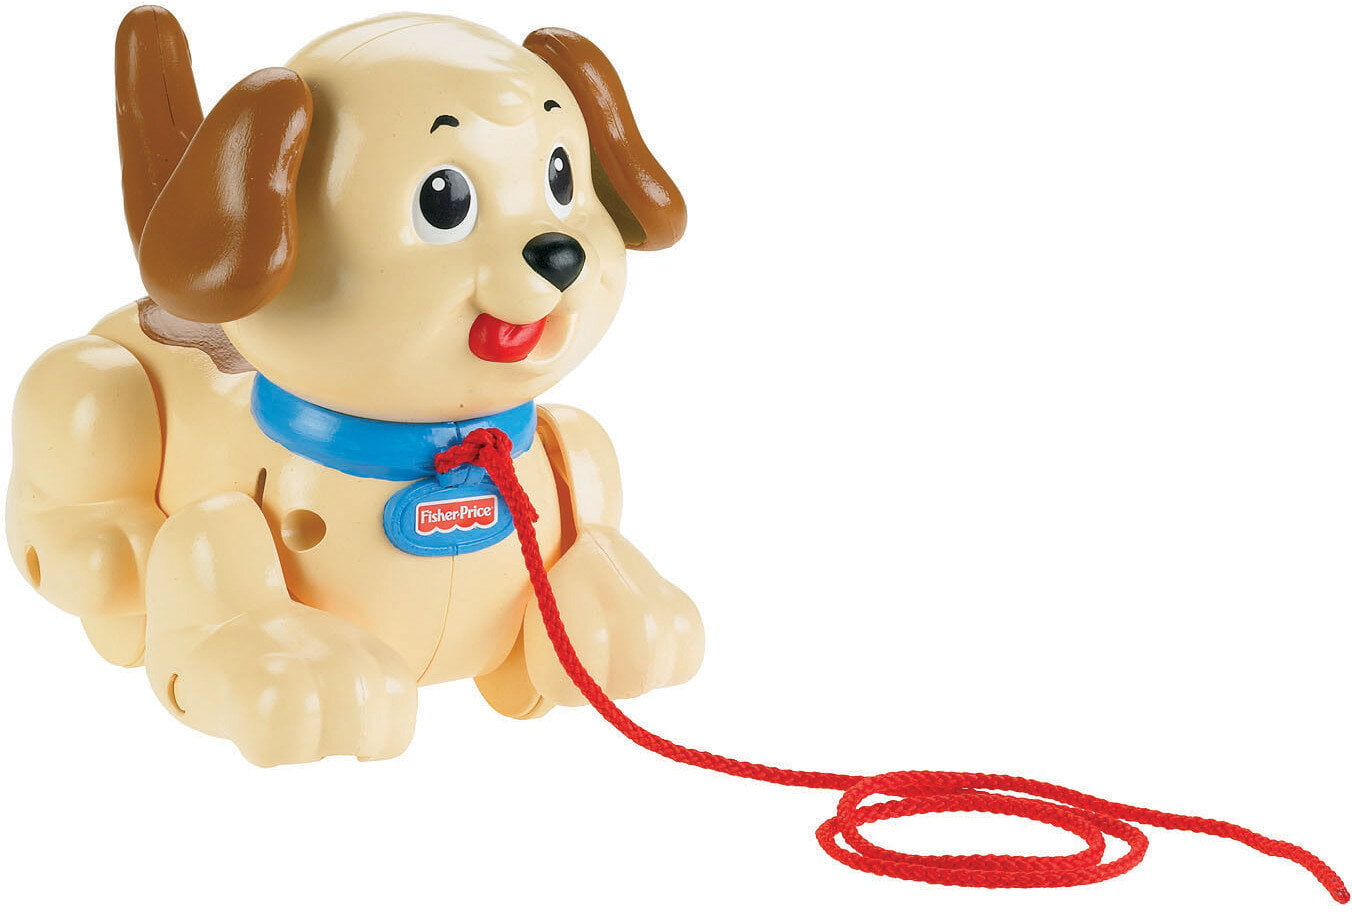 Basic Fun Fisher-Price Little Snoopy Toy for sale online 